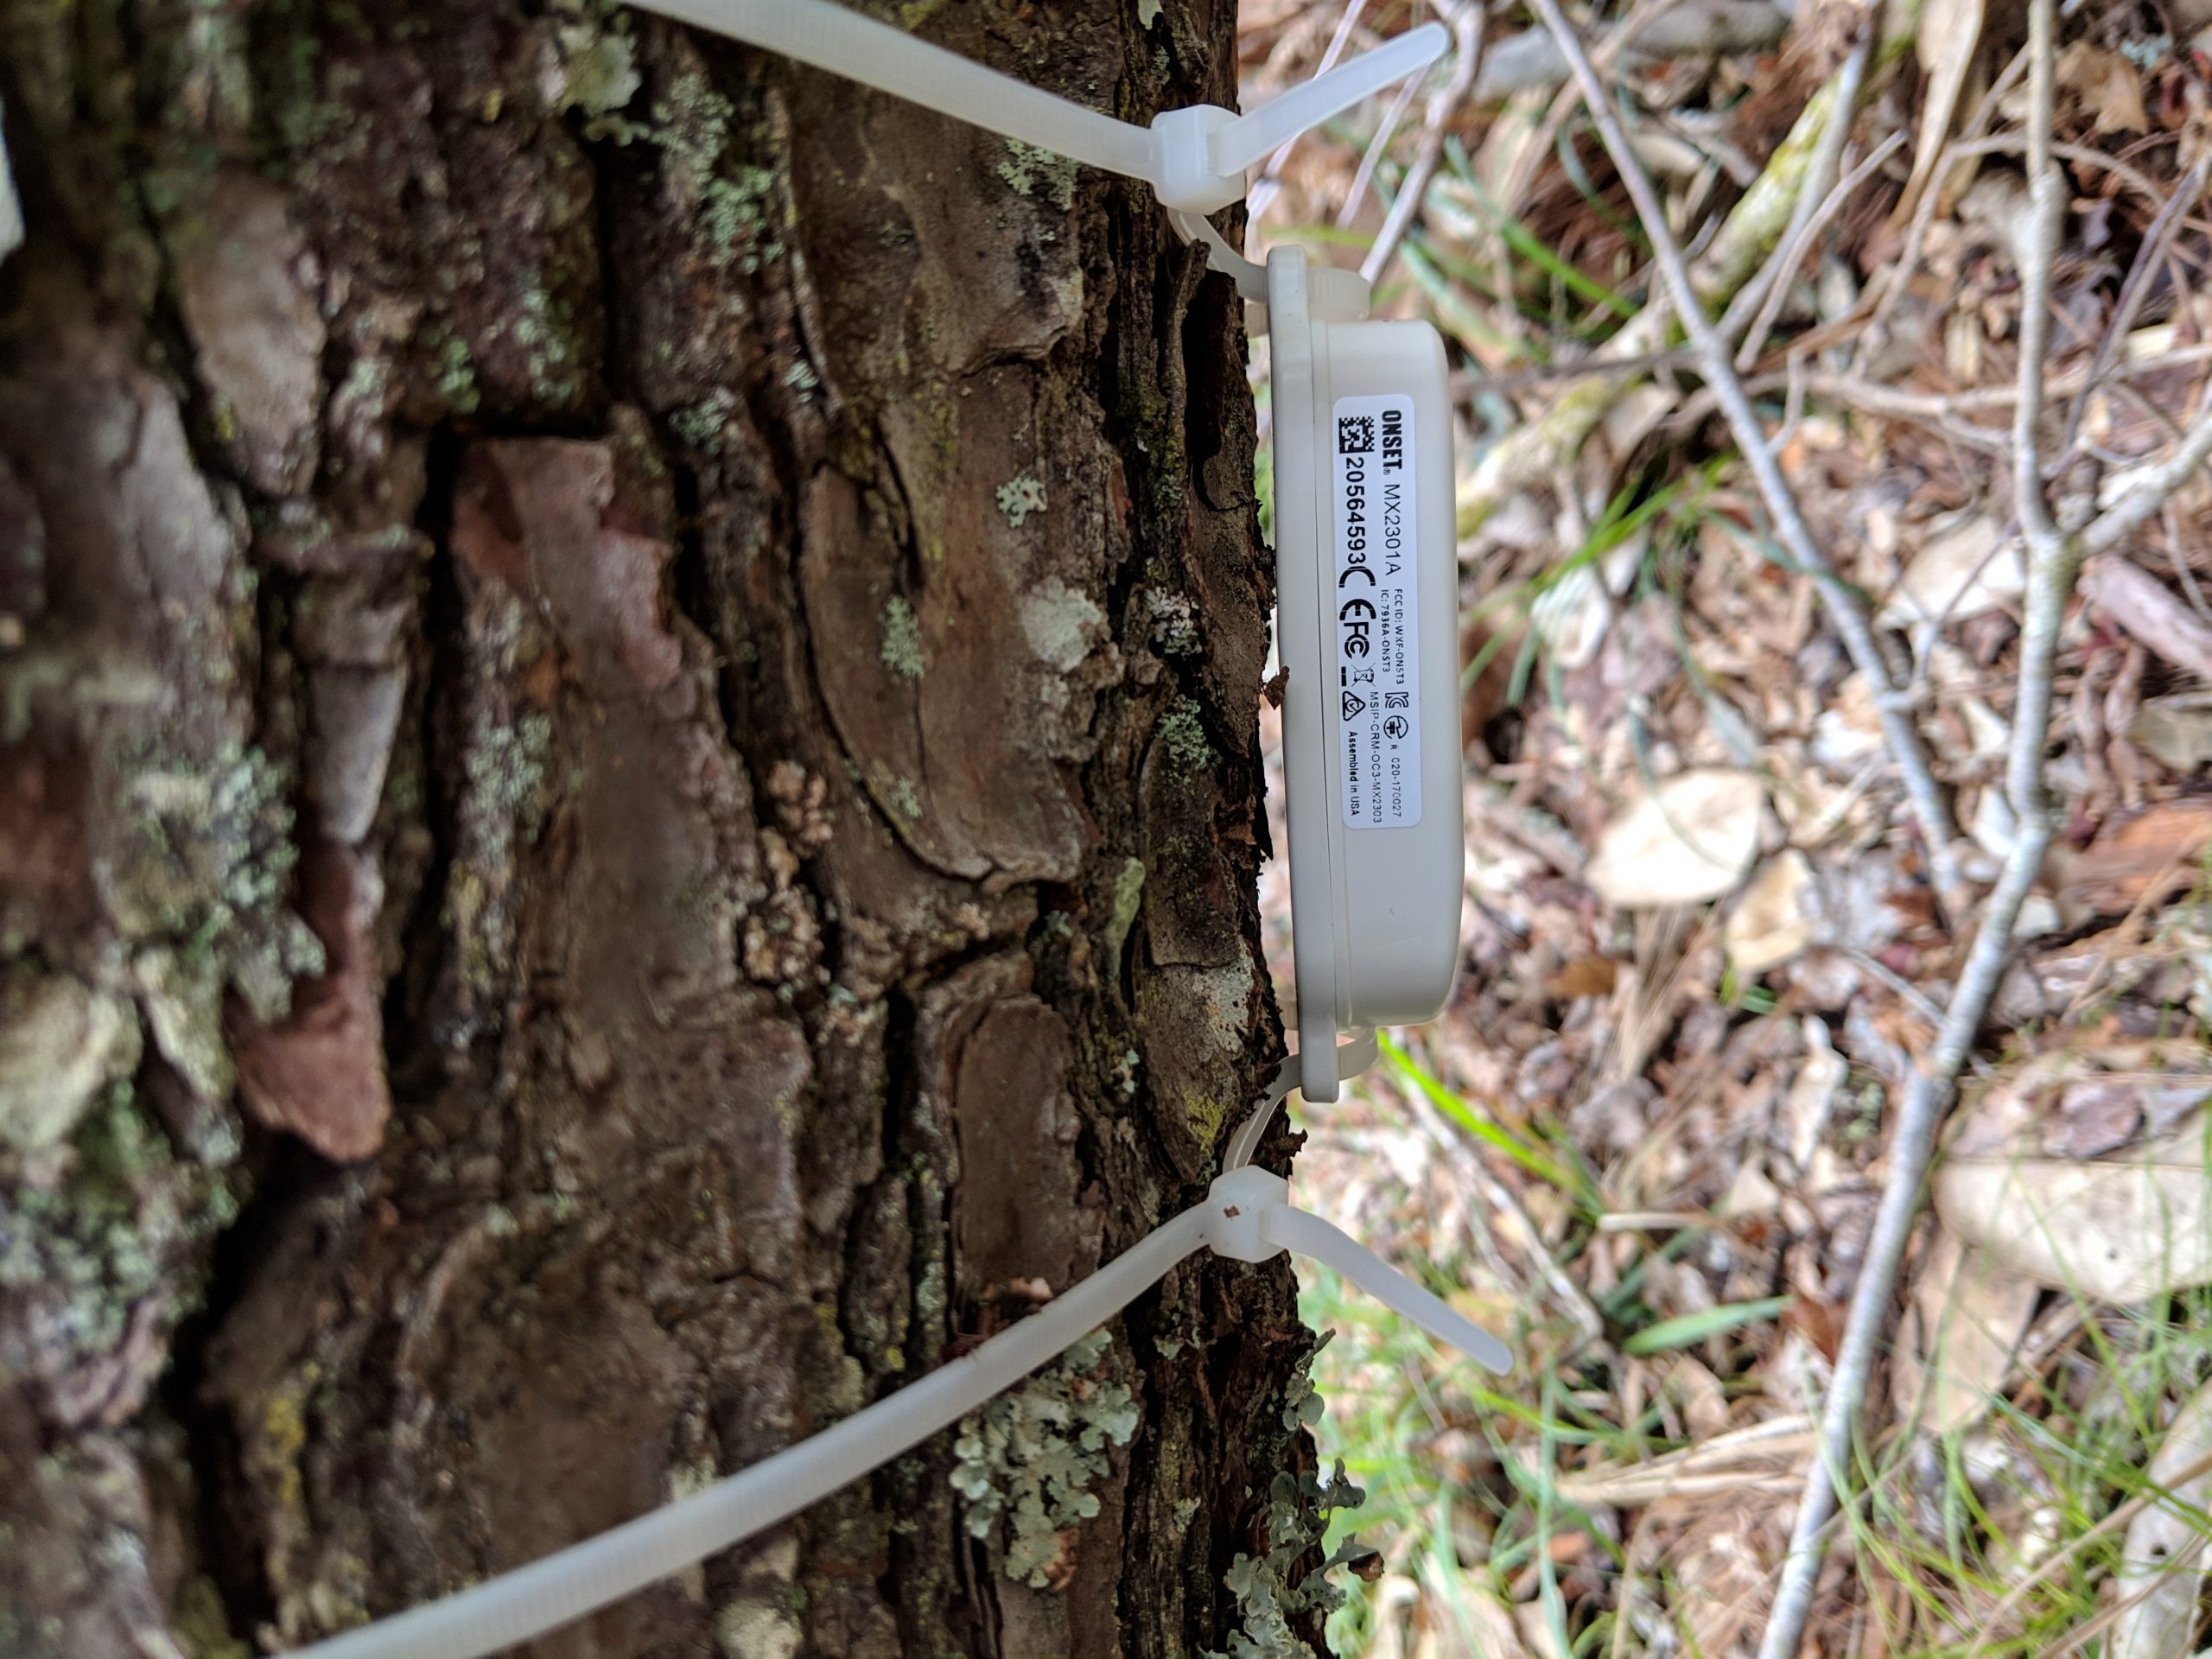 Hobo dataloggers are helping record environmental conditions of the Florida torreya that survived the storm, seeing how conditions impact regrowth.